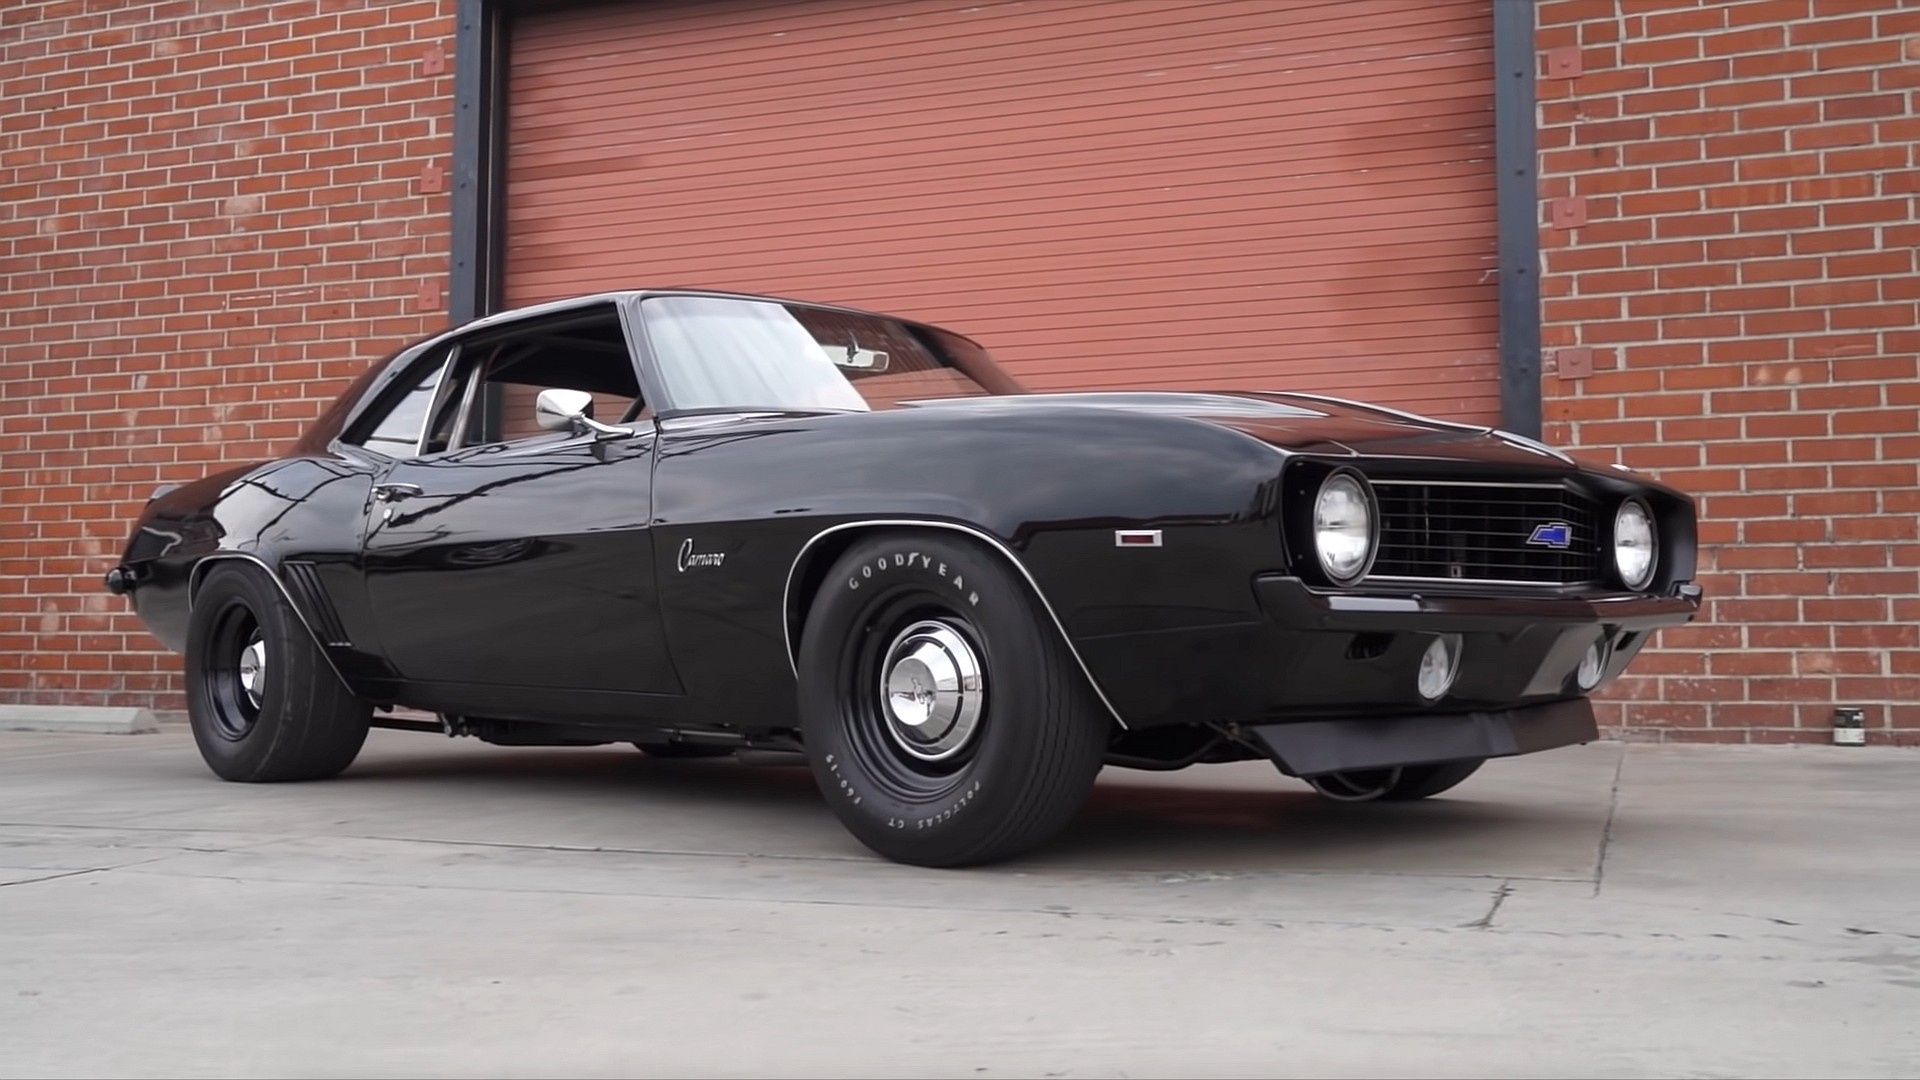 1969 Chevy Camaro Is a Deceptive Classic, Hides 700-HP, All-Motor V8 Under  the Hood - autoevolution